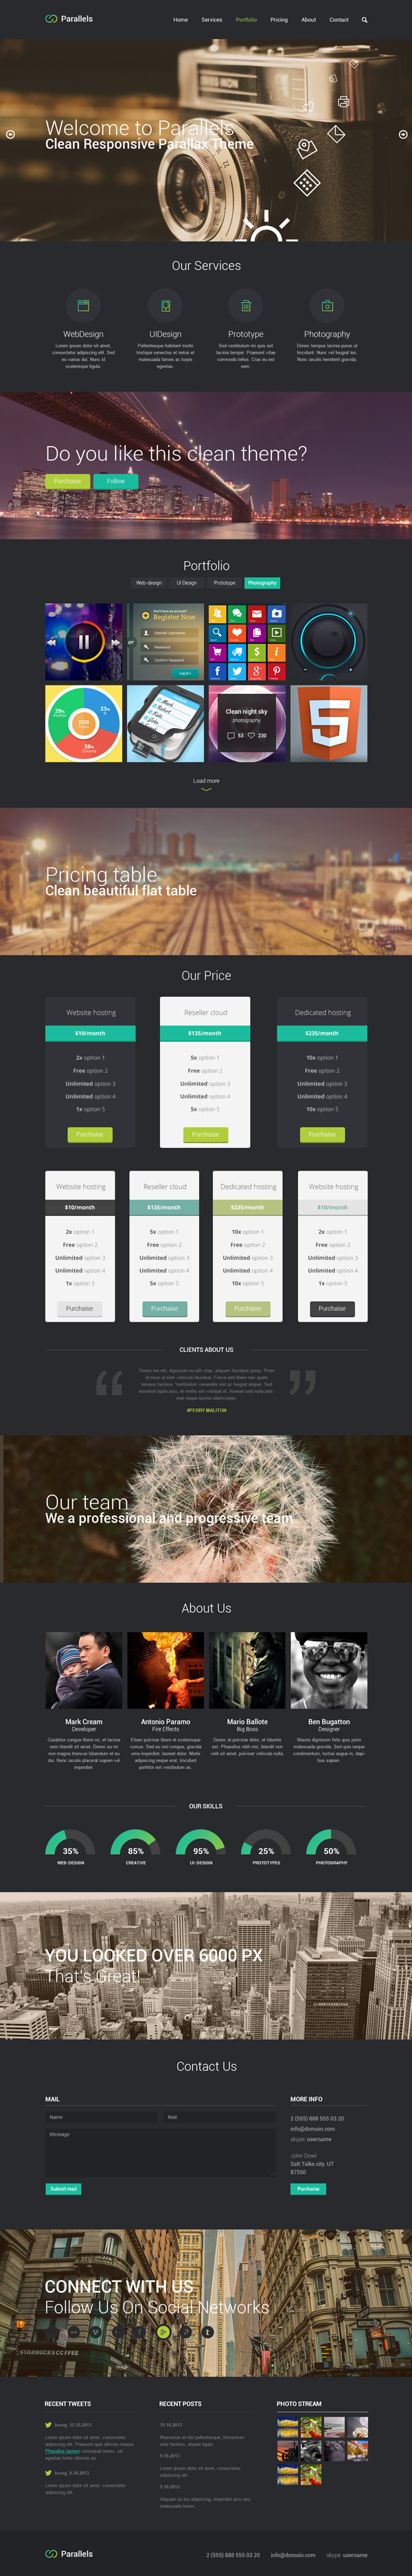 Parallels PSD Responsive Template